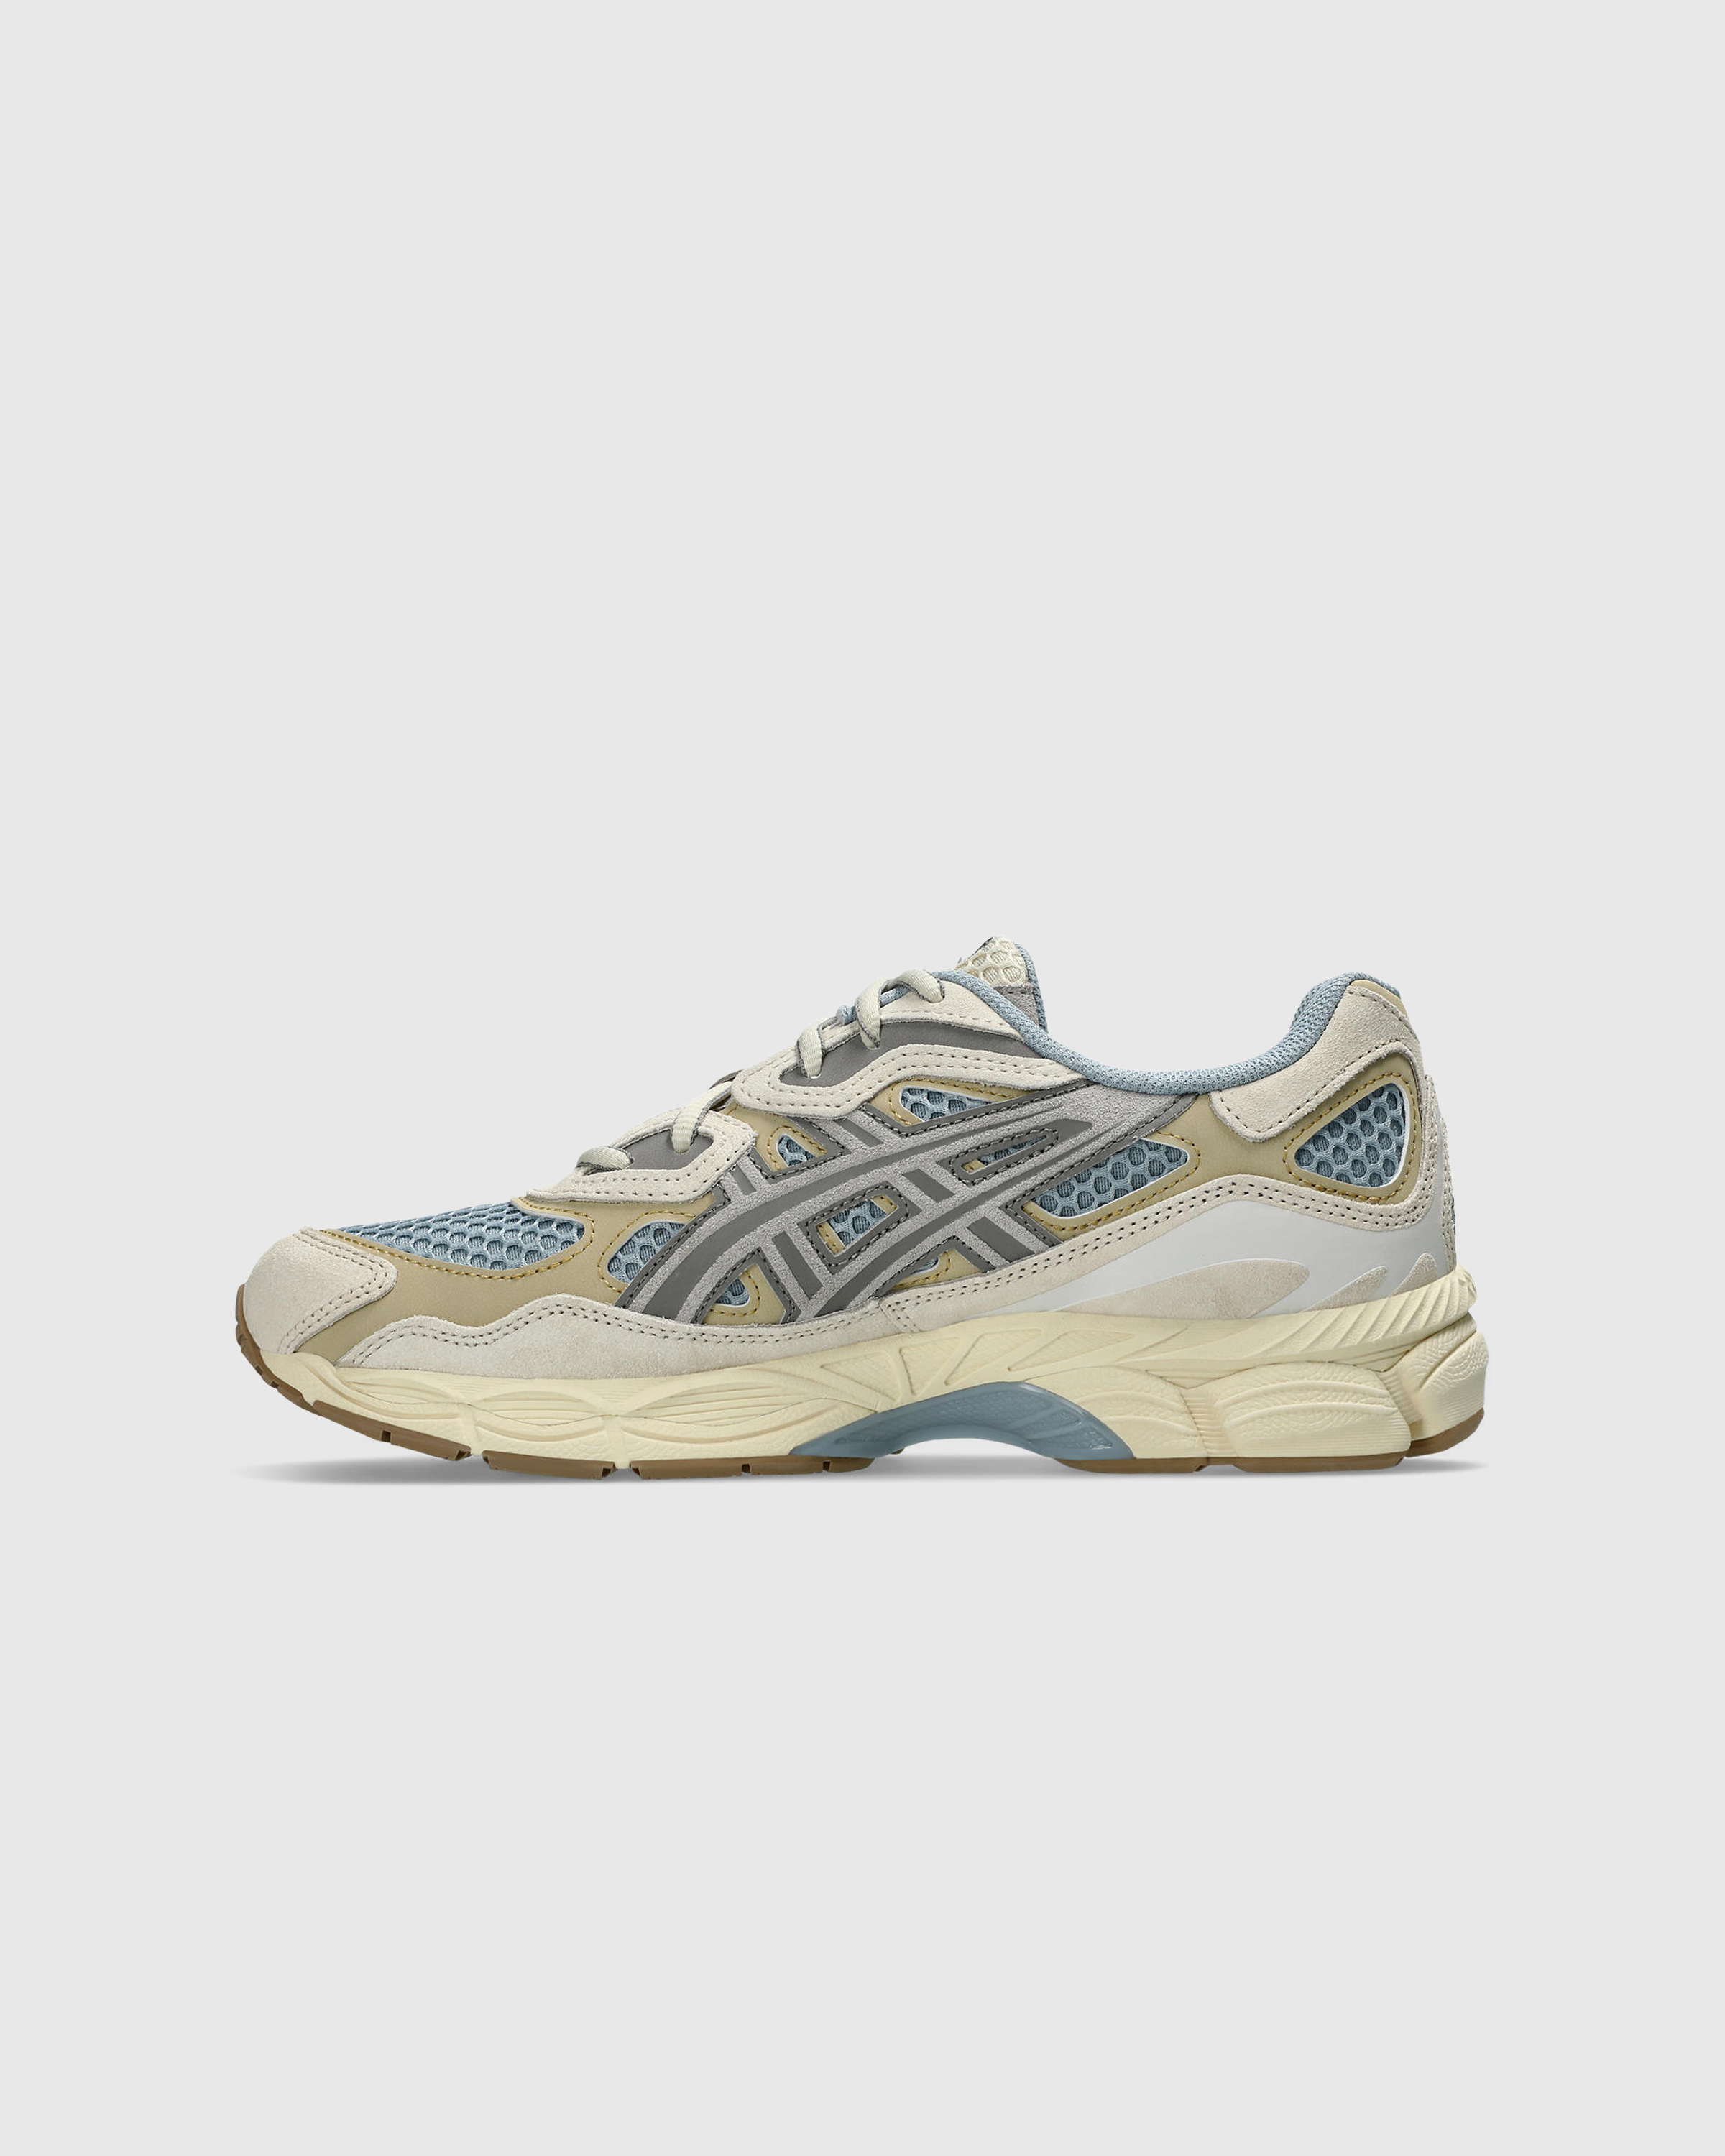 asics – GEL-NYC Dolphin Grey/Oyster Grey - Low Top Sneakers - Grey - Image 2